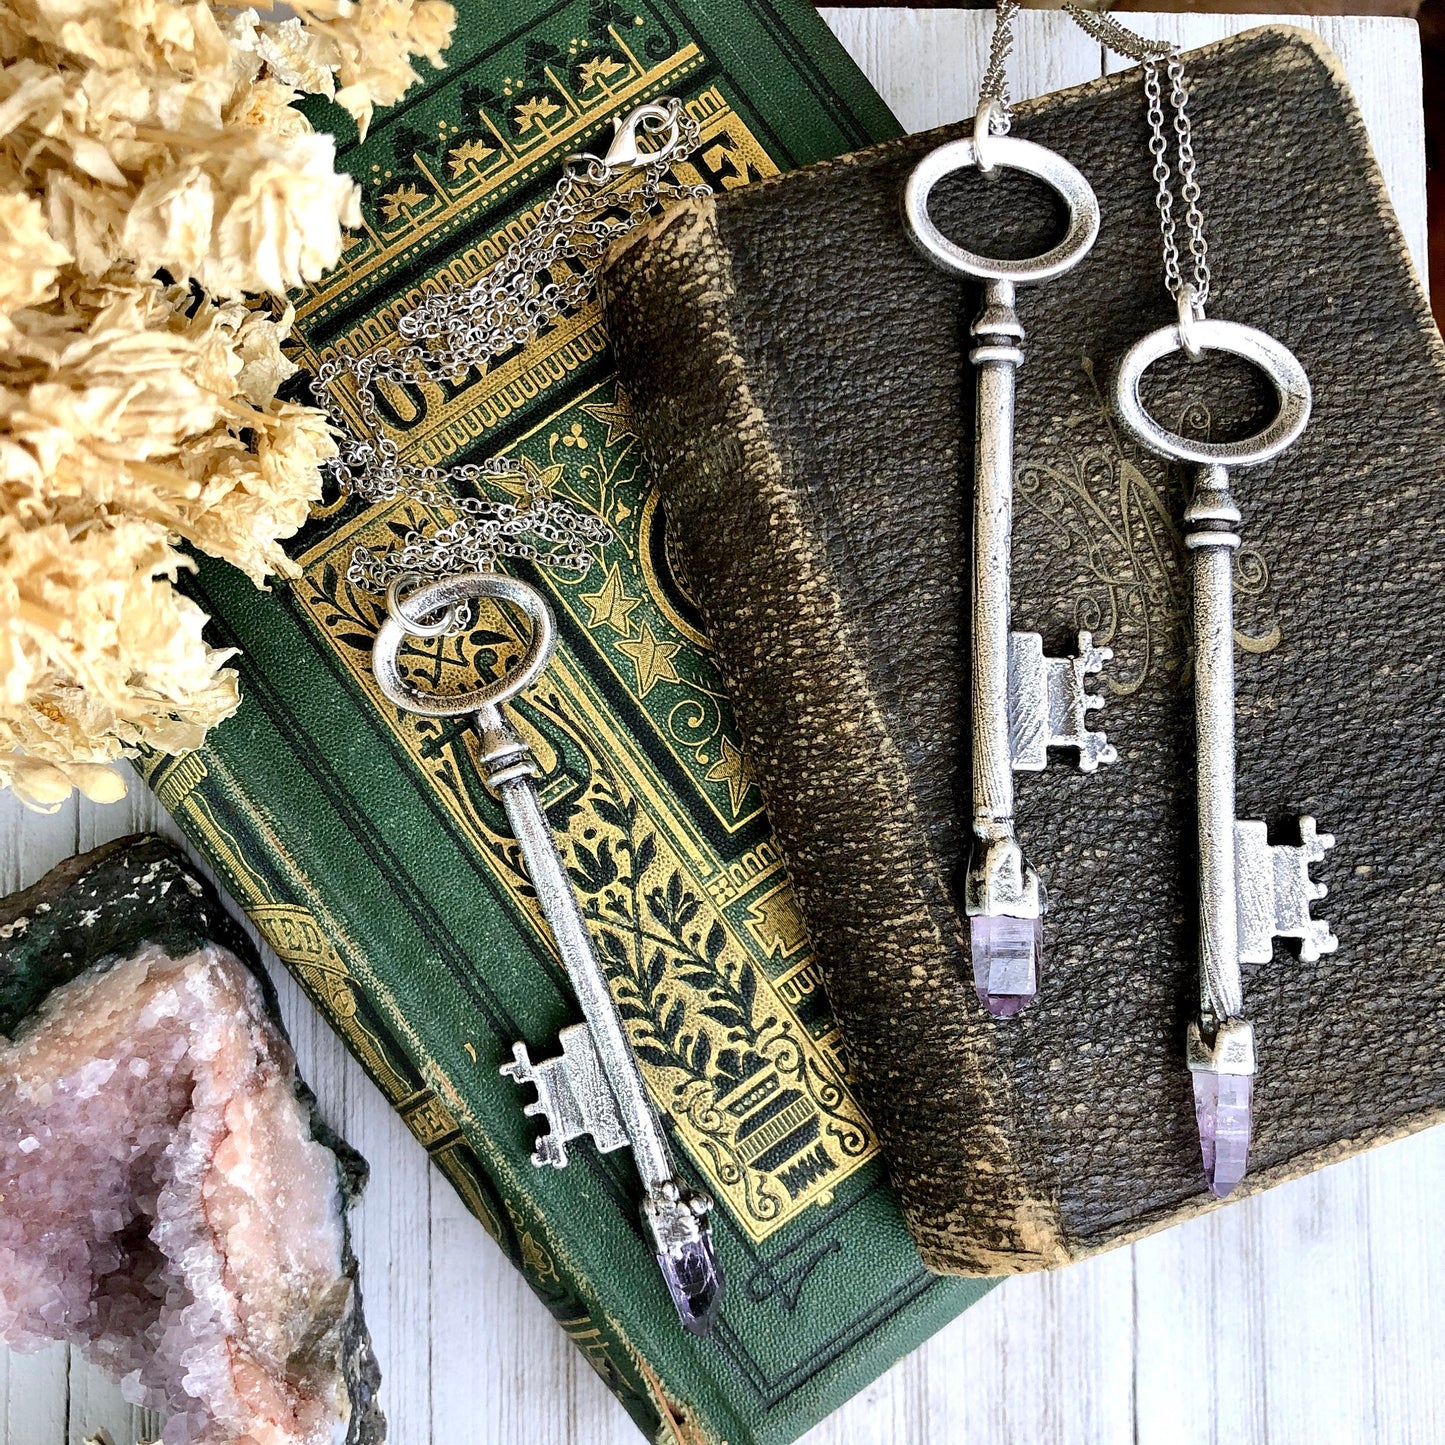 antique key necklace, Crystal Necklaces, Etsy ID: 745548723, FOXLARK- NECKLACES, Gothic Jewelry, Jewelry, Necklaces, Raw Amethyst Jewelry, raw crystal jewelry, Raw crystal necklace, Raw Crystal Pendant, Raw Stone Jewelry, Skeleton Key, Steampunk Jewelry,